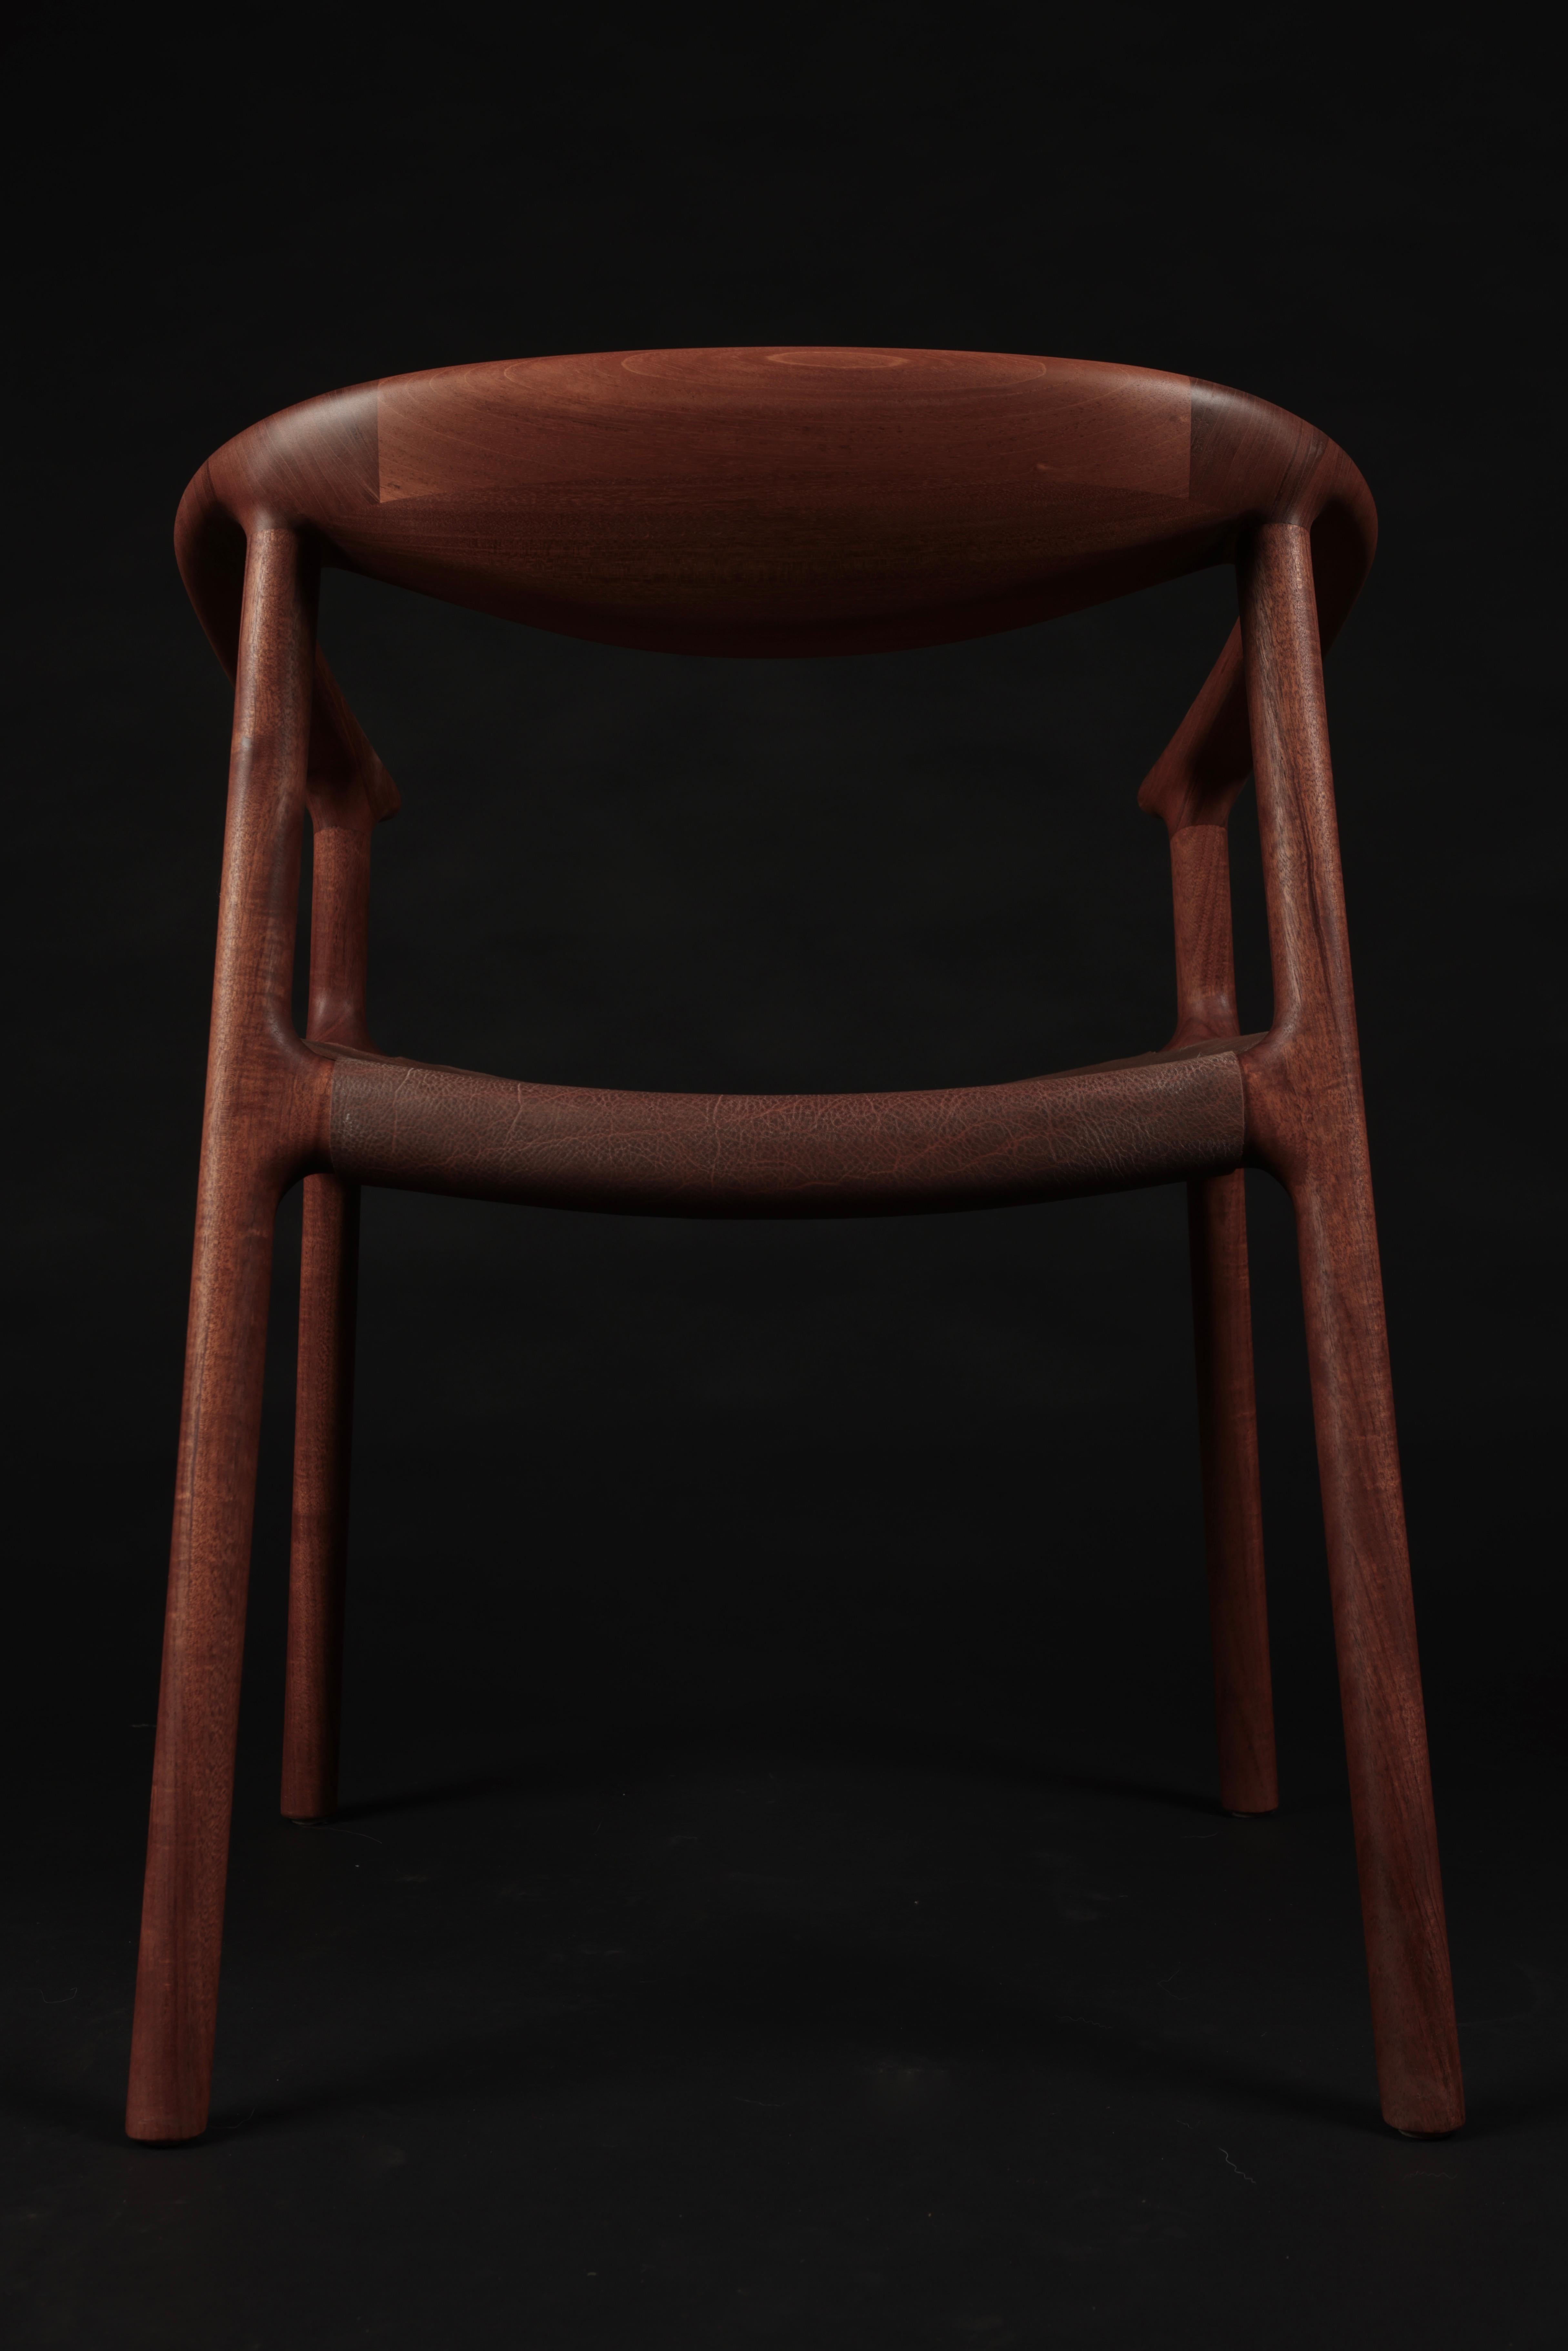 Tusk sling dining chair by Möbius Objects - hand-sculpted here in solid Honduran Mahogany.  Raked legs offer a unique 'wind-swept' silhouette. The veg-tan leather sling seat is ergonomically wrapped with contact points padded in high-density